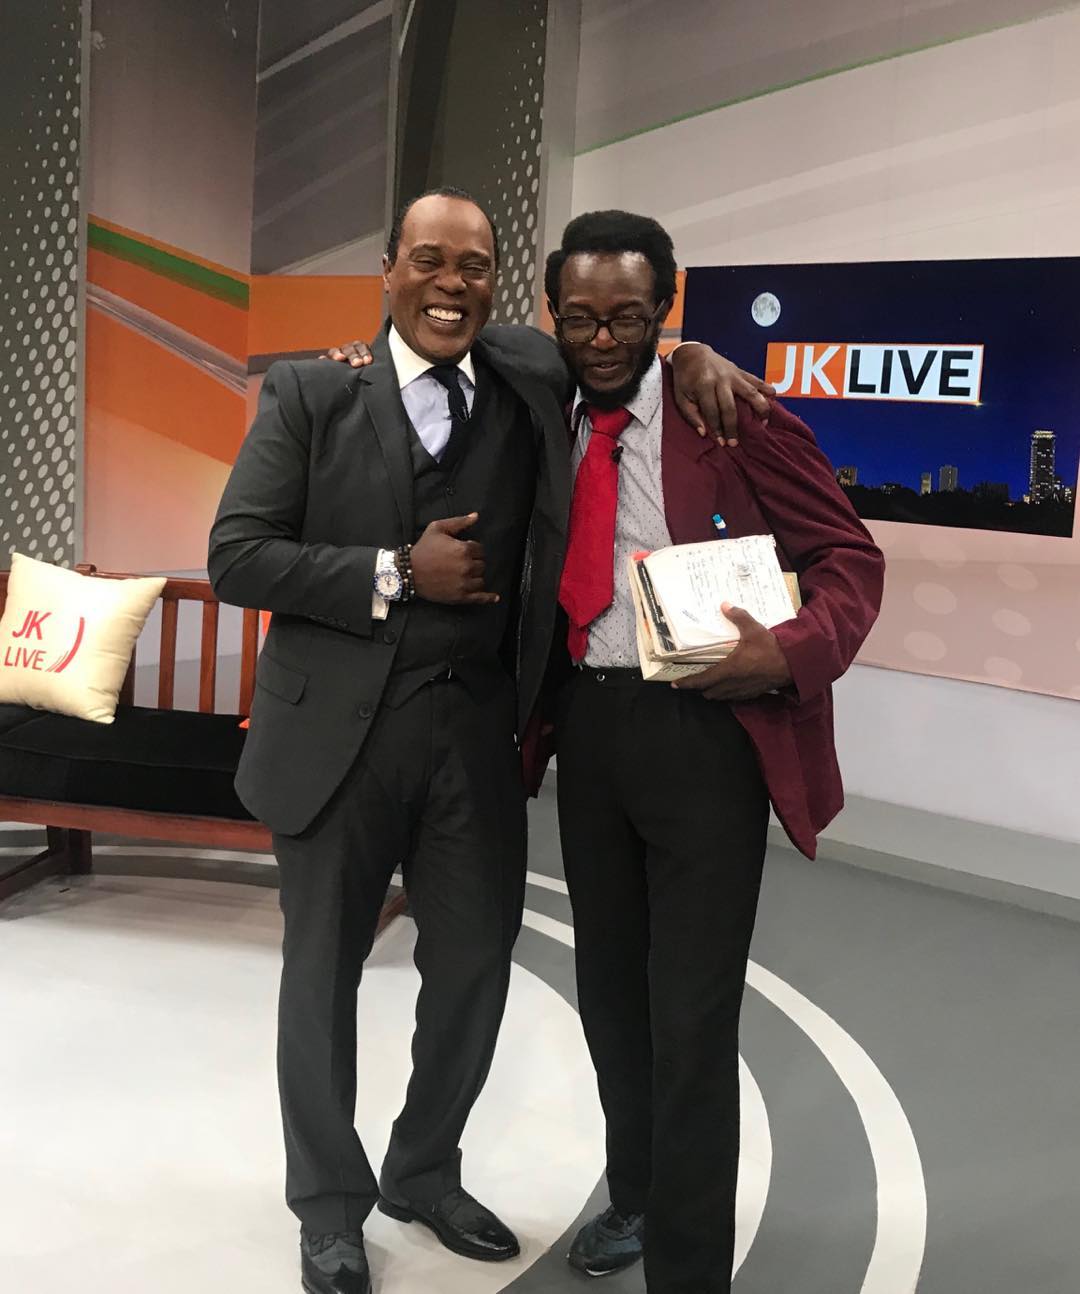 2018-10-11-Prof. Hamo And Jeff Koinange: Comedian, Citizen TV Host Were A Hoot And A Half On JK Live In Kellywood